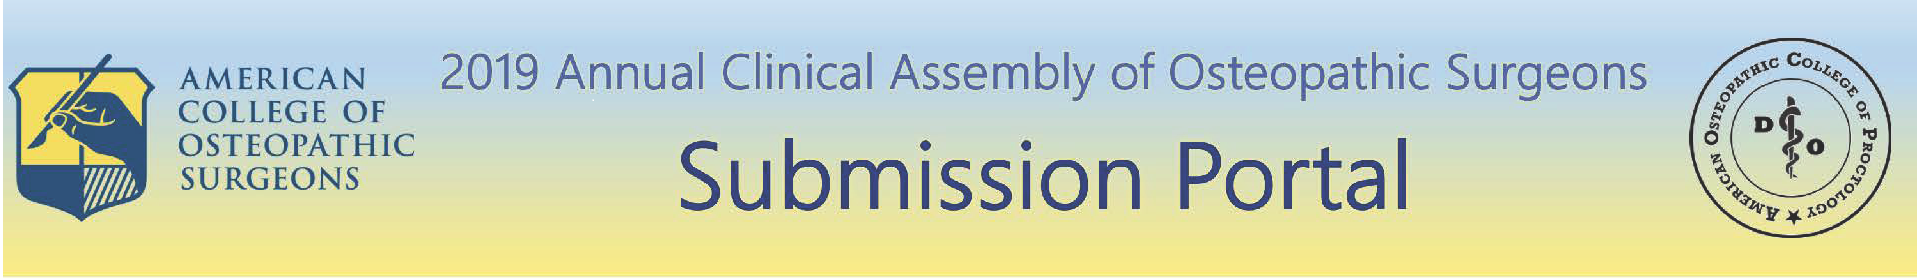 2019 Annual Clinical Assembly of Osteopathic Surgeons (ACA)  Event Banner